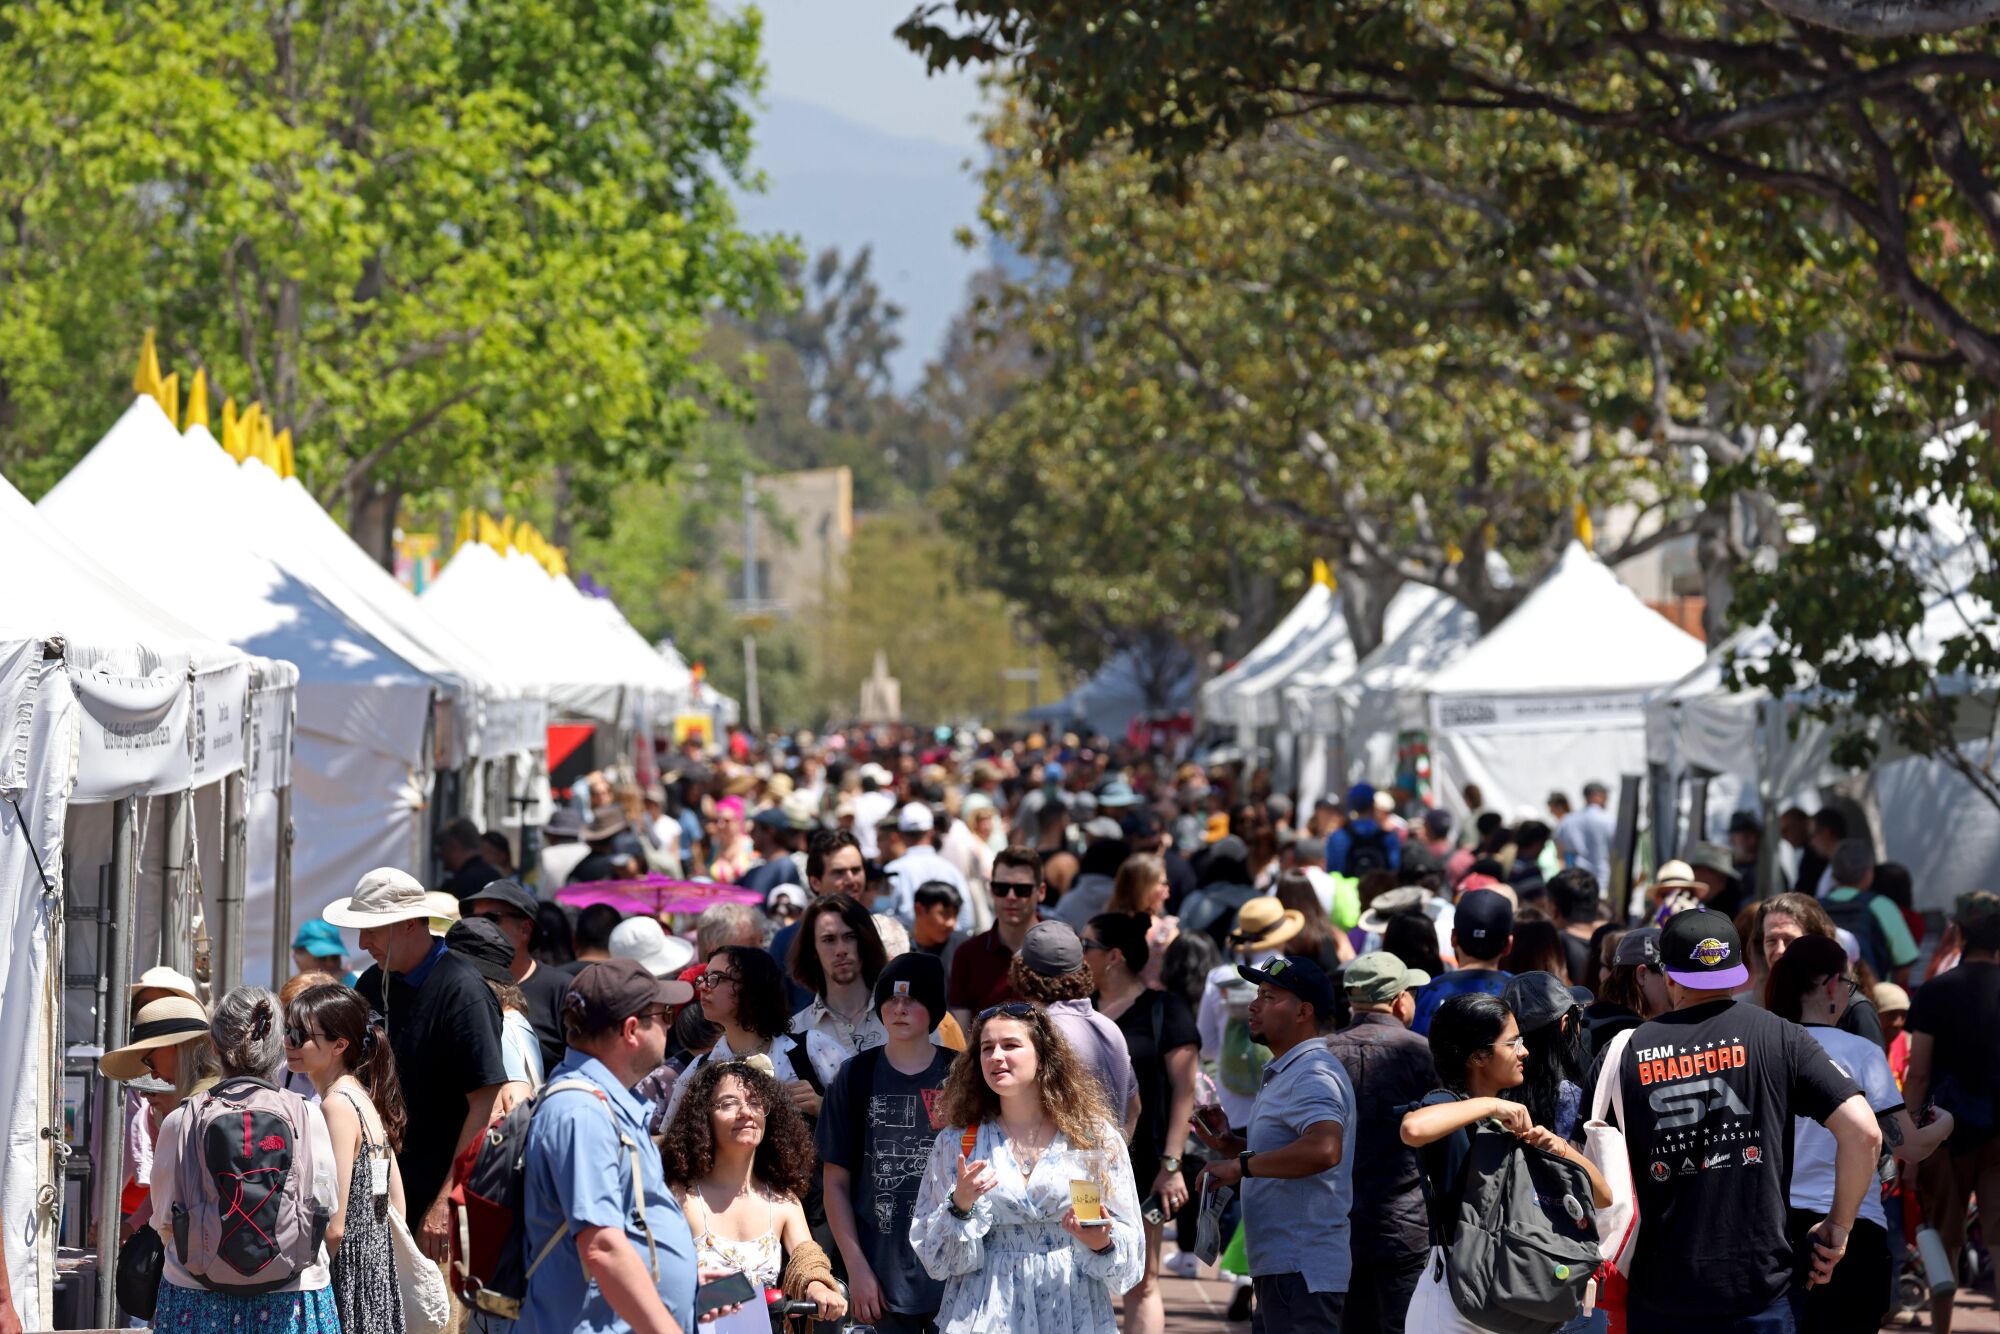 Crowds of people mull around tents at the Los Angeles Times Festival of Books at USC.